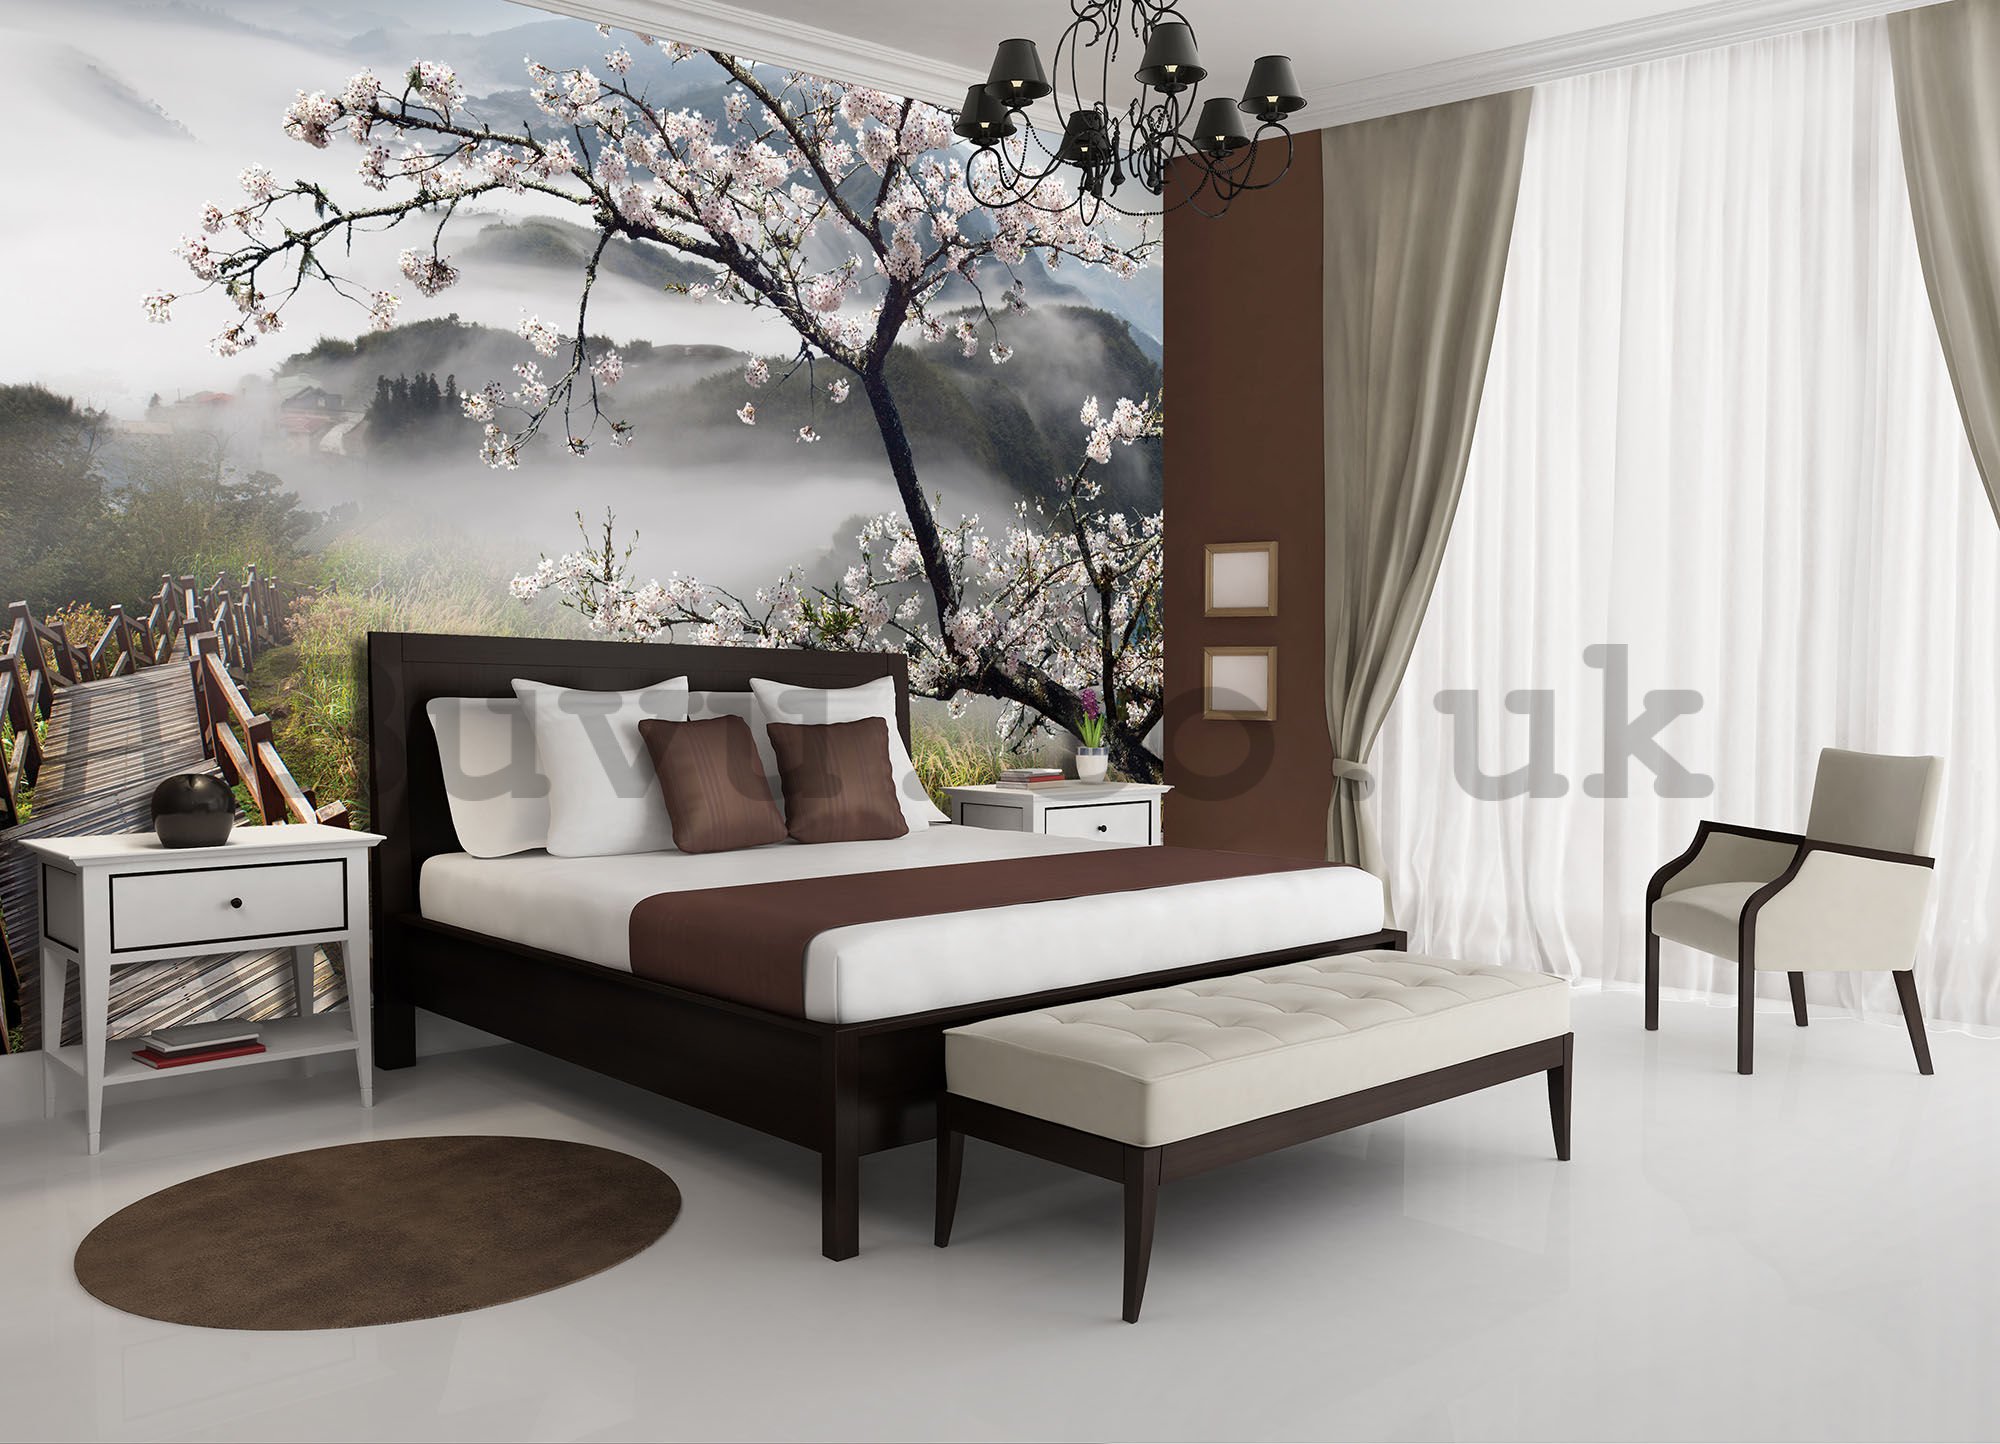 Wall mural vlies: Cherry tree above the stairs - 104x152,5 cm